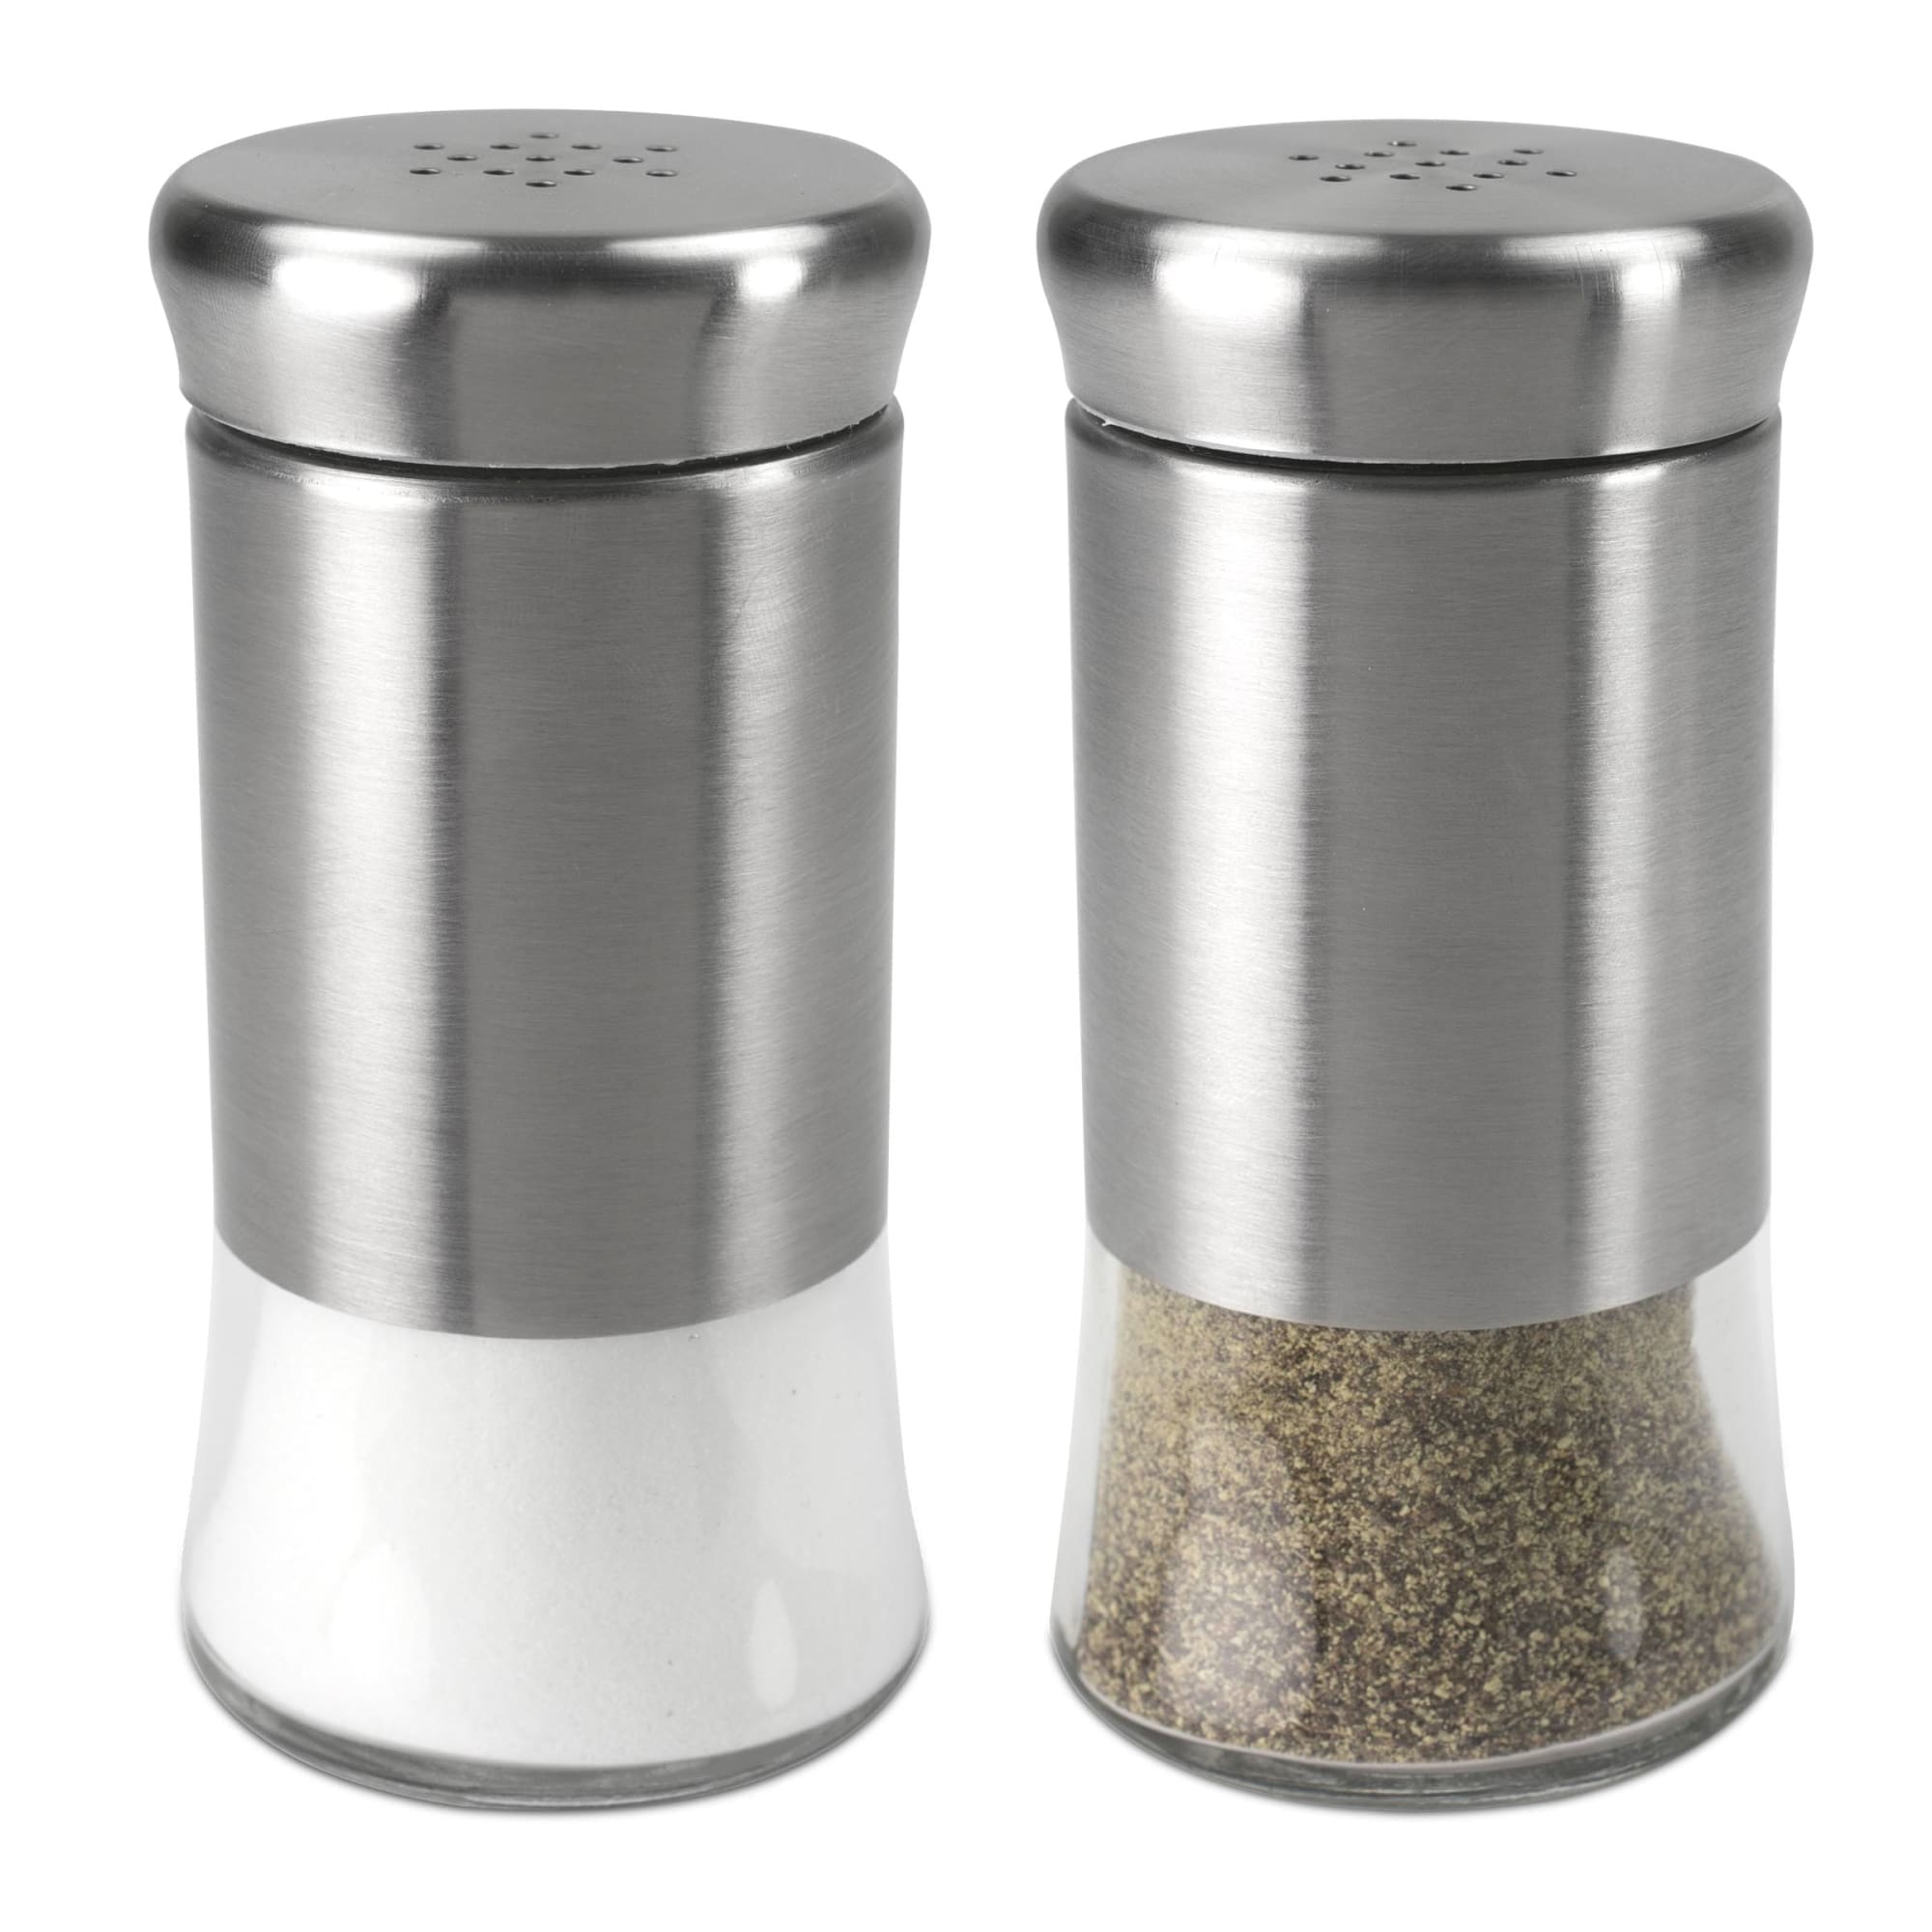 Michael Graves Design Essence 2 Piece 2.5 Ounce Stainless Steel Salt and Pepper Set with Clear Glass Bottoms, Silver $3.00 EACH, CASE PACK OF 6